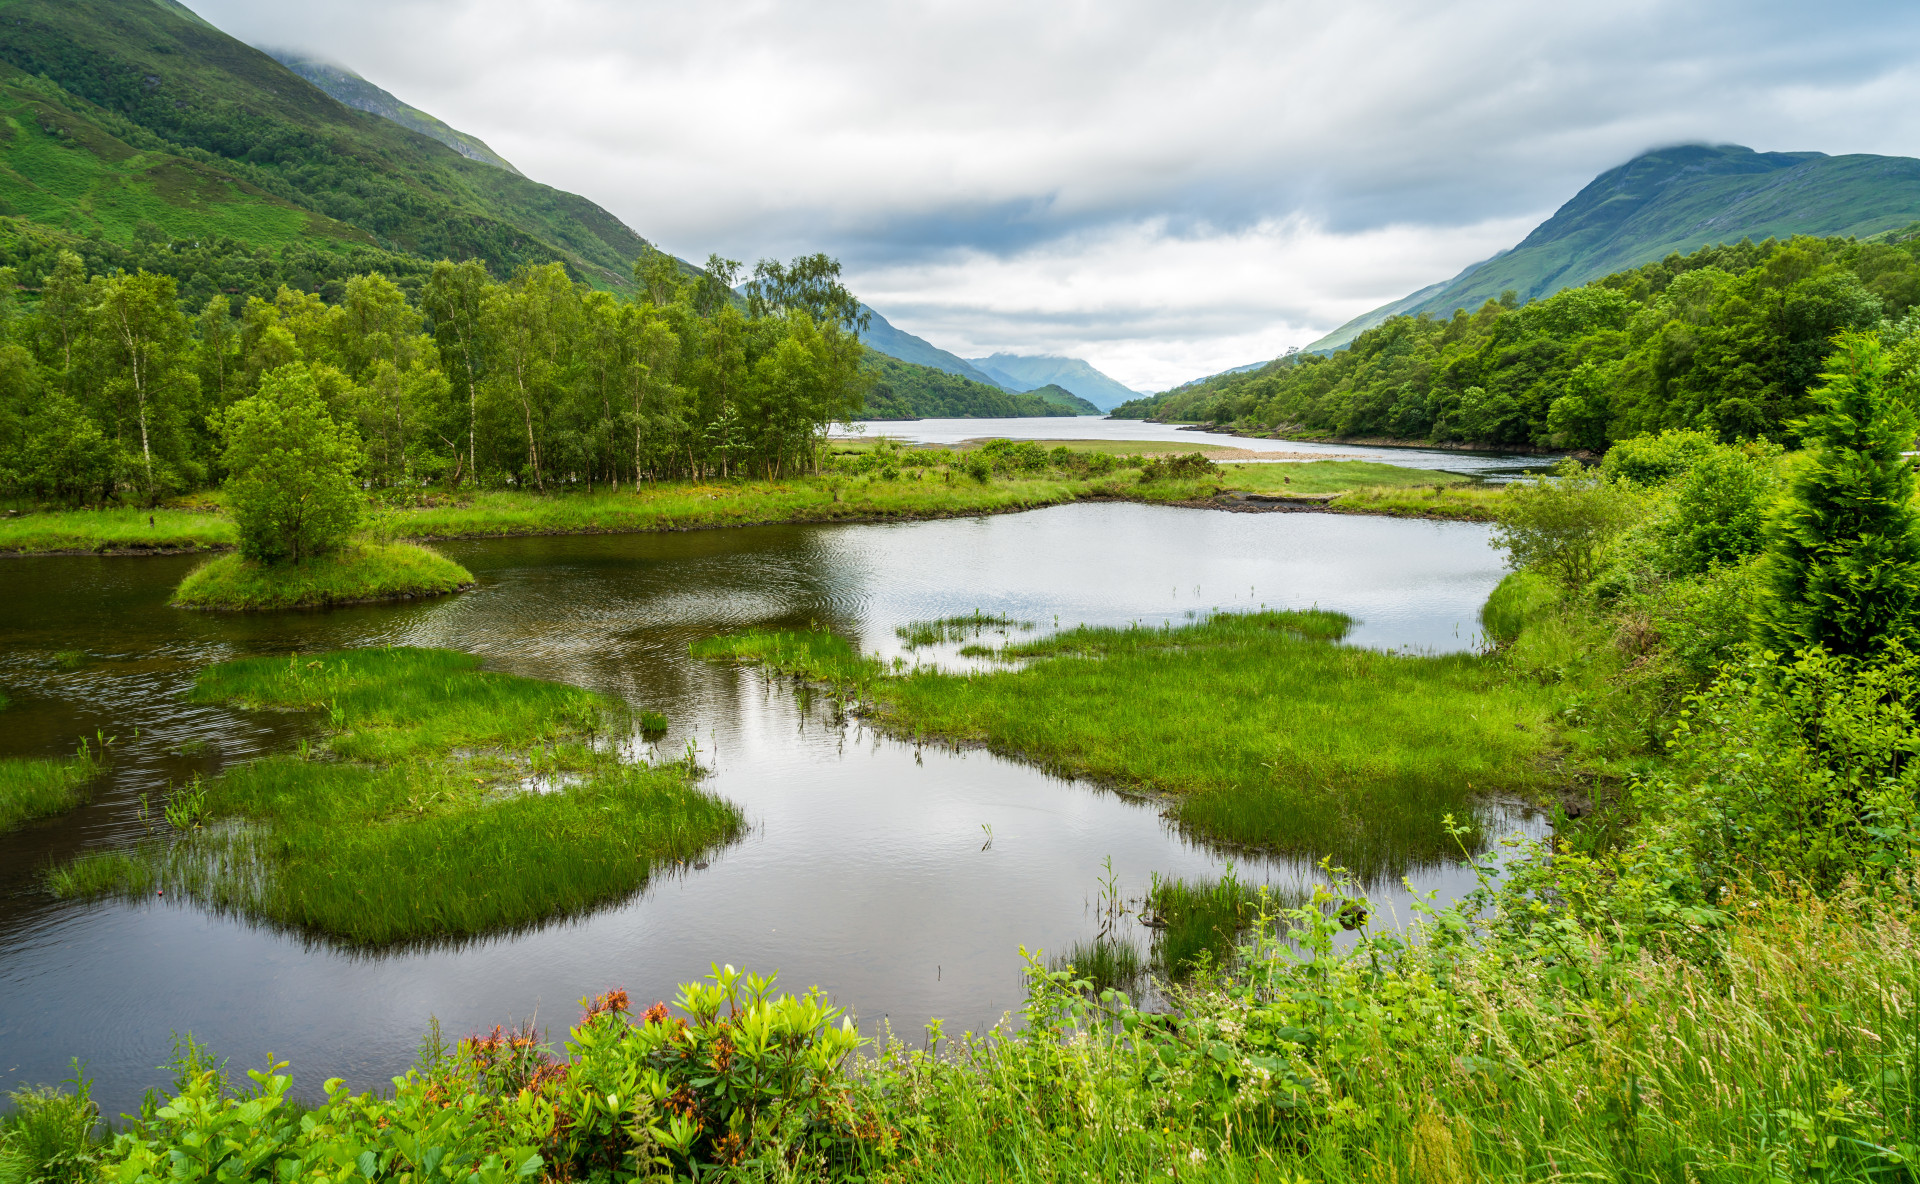 Driving over the moor will take you down to Glen Coe and over Loch Leven.<p><a href="https://www.msn.com/en-us/community/channel/vid-7xx8mnucu55yw63we9va2gwr7uihbxwc68fxqp25x6tg4ftibpra?cvid=94631541bc0f4f89bfd59158d696ad7e">Follow us and access great exclusive content every day</a></p>